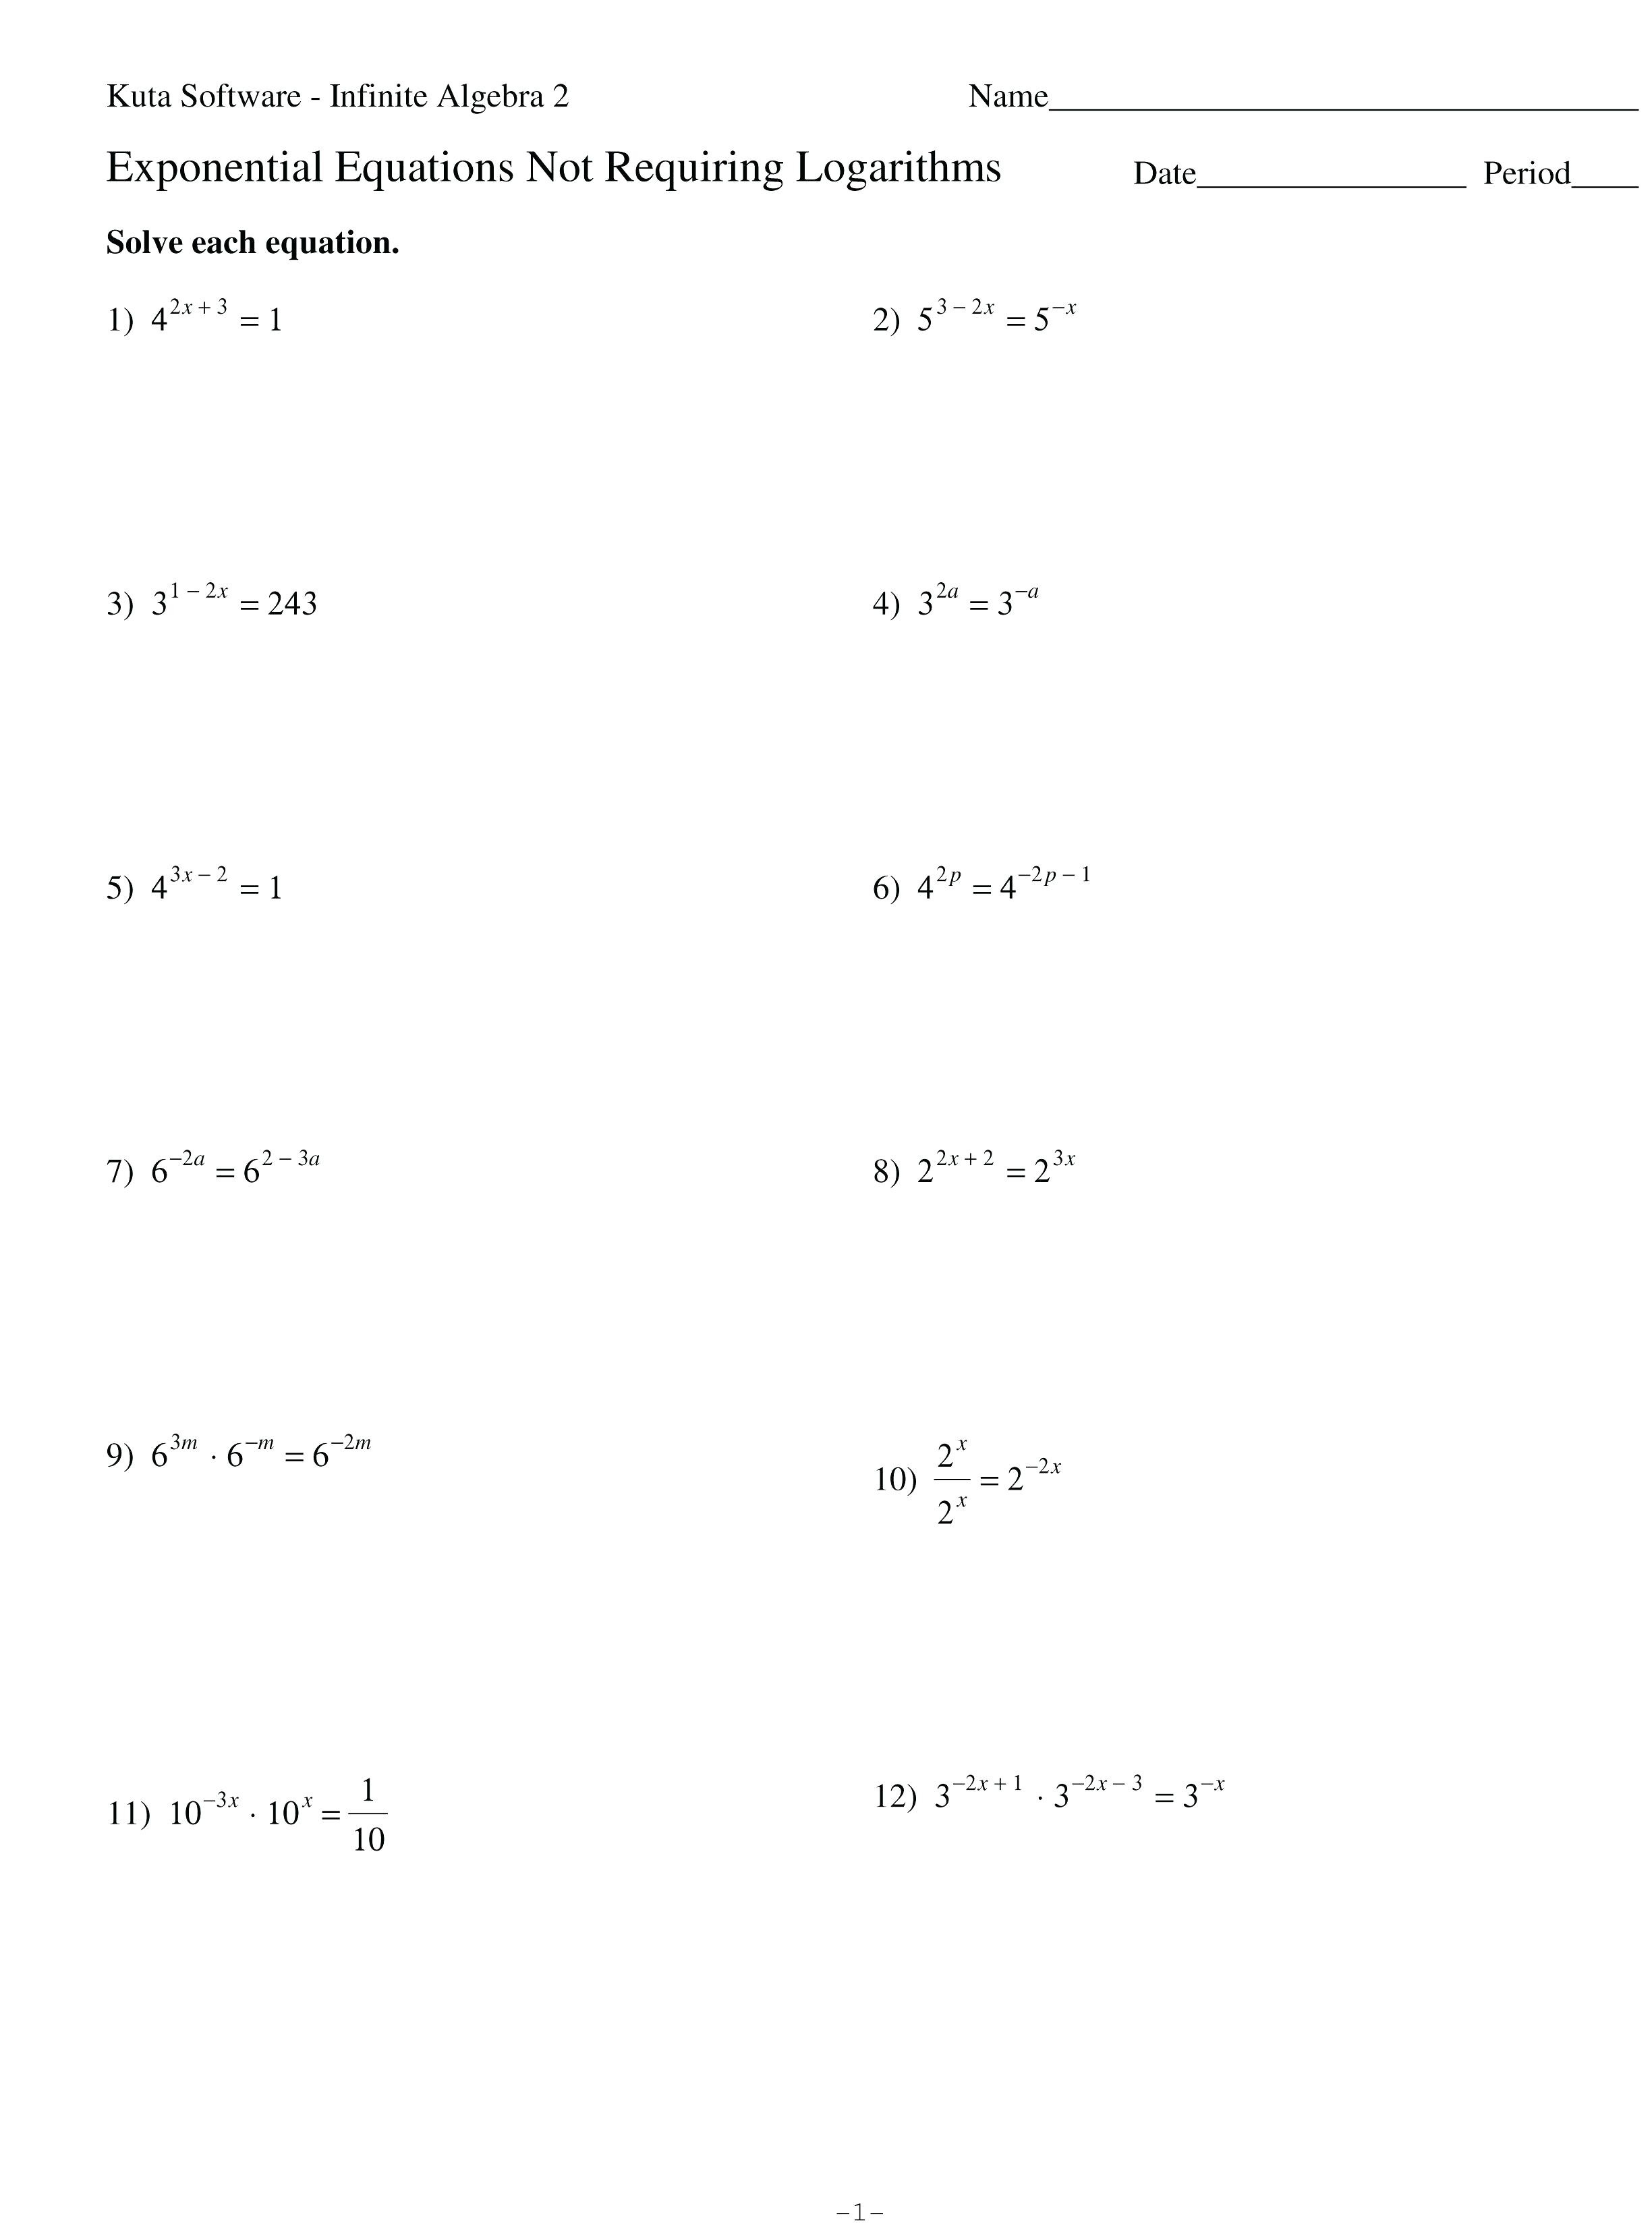 010 Printable Word Exponential Equations Worksheet Math